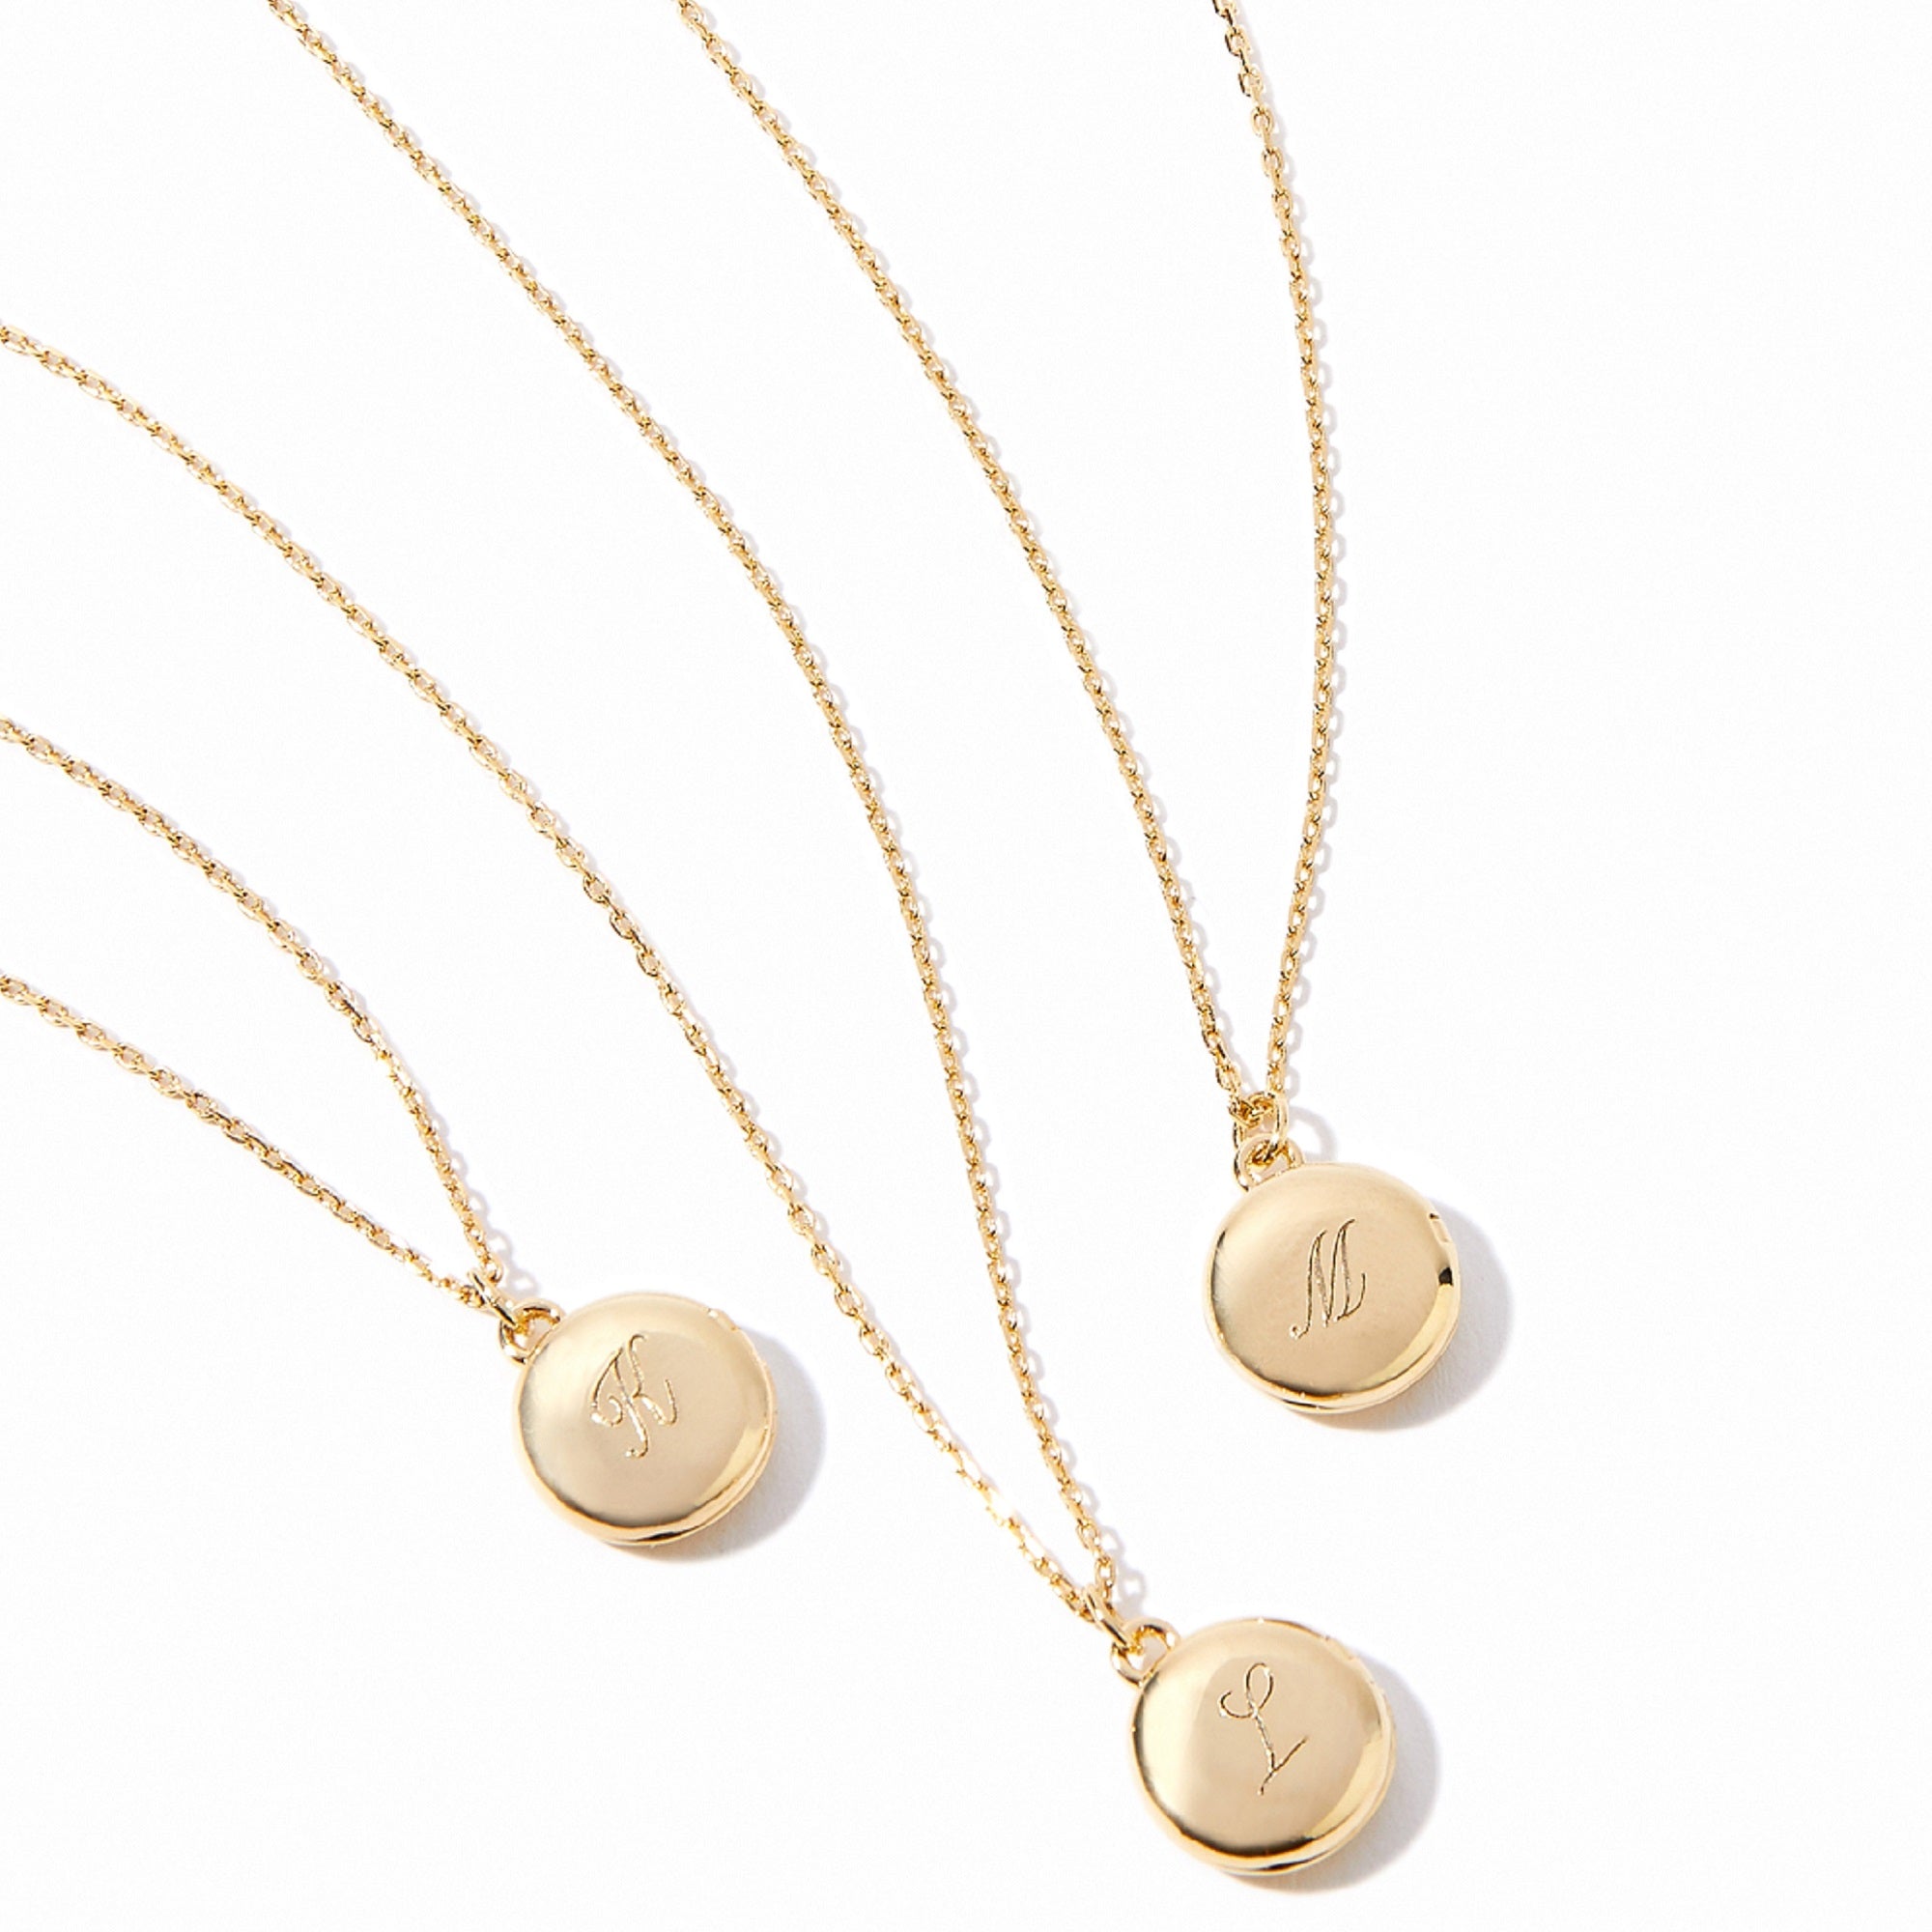 Real Gold Plated Initia Necklace Locket P For Women By Accessorize London